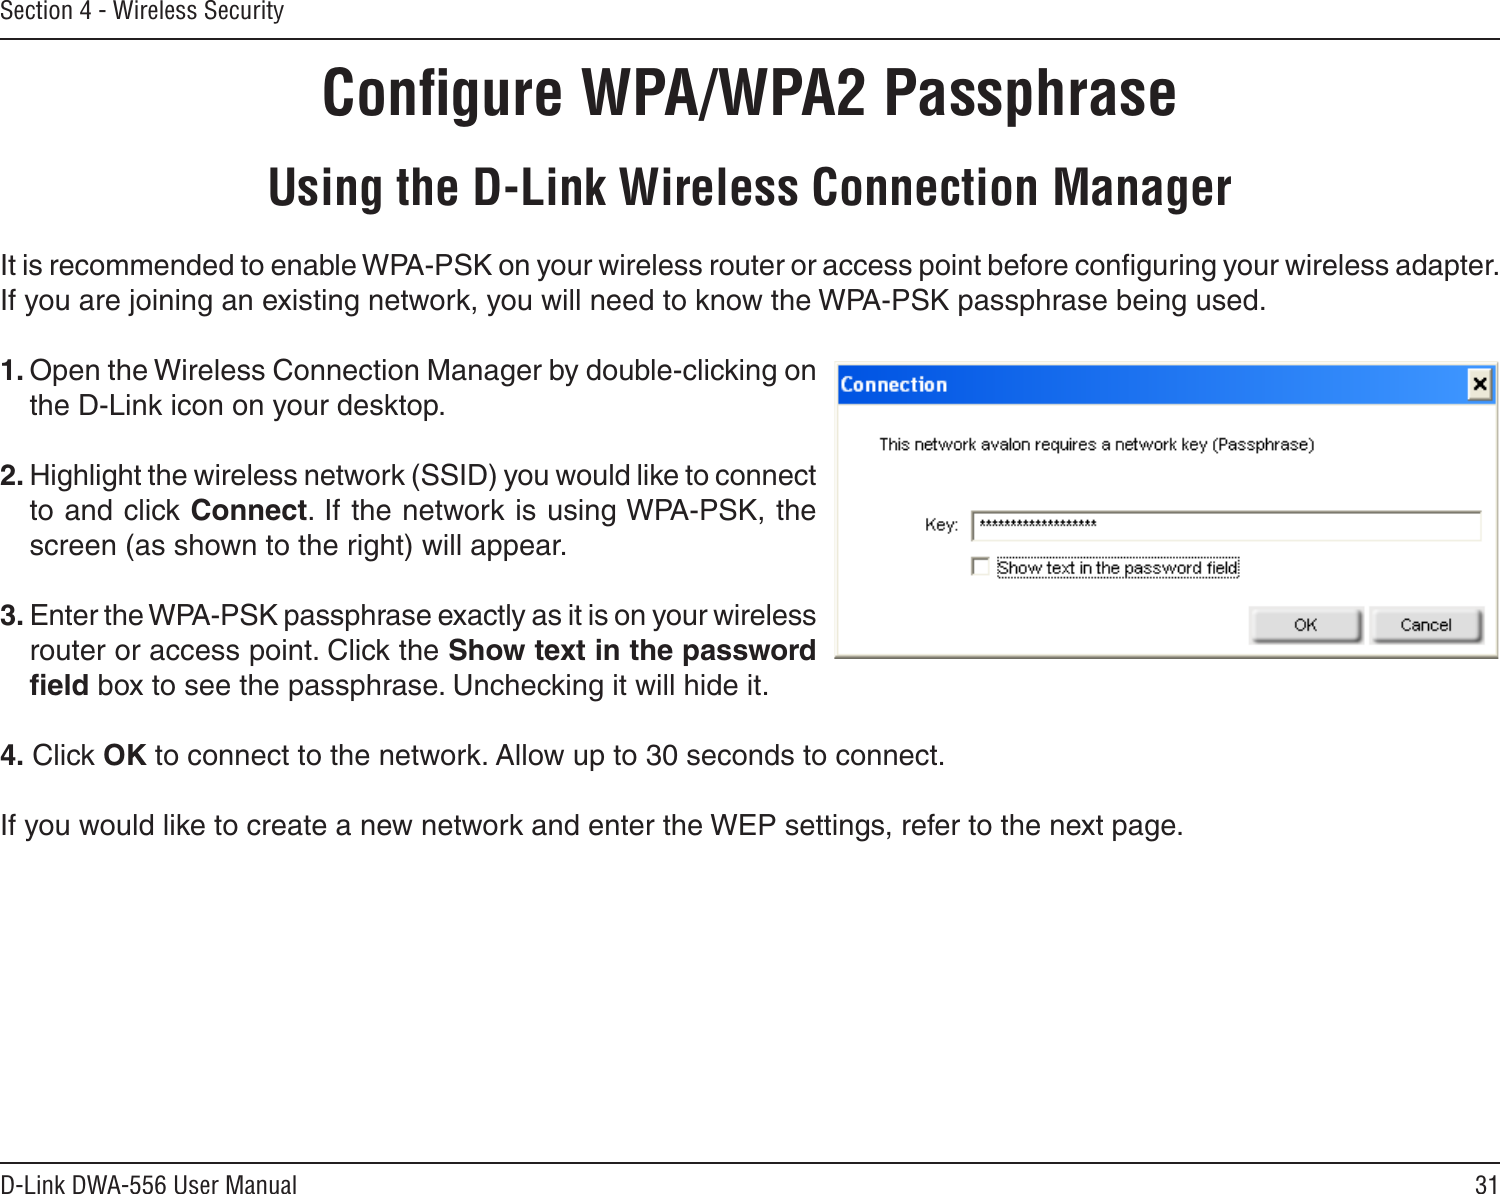 31D-Link DWA-556 User ManualSection 4 - Wireless SecurityConﬁgure WPA/WPA2 PassphraseUsing the D-Link Wireless Connection ManagerIt is recommended to enable WPA-PSK on your wireless router or access point before conﬁguring your wireless adapter. If you are joining an existing network, you will need to know the WPA-PSK passphrase being used.1. Open the Wireless Connection Manager by double-clicking on the D-Link icon on your desktop. 2. Highlight the wireless network (SSID) you would like to connect to and click Connect. If the network is using WPA-PSK, the screen (as shown to the right) will appear. 3. Enter the WPA-PSK passphrase exactly as it is on your wireless router or access point. Click the Show text in the password ﬁeld box to see the passphrase. Unchecking it will hide it.4. Click OK to connect to the network. Allow up to 30 seconds to connect.If you would like to create a new network and enter the WEP settings, refer to the next page.